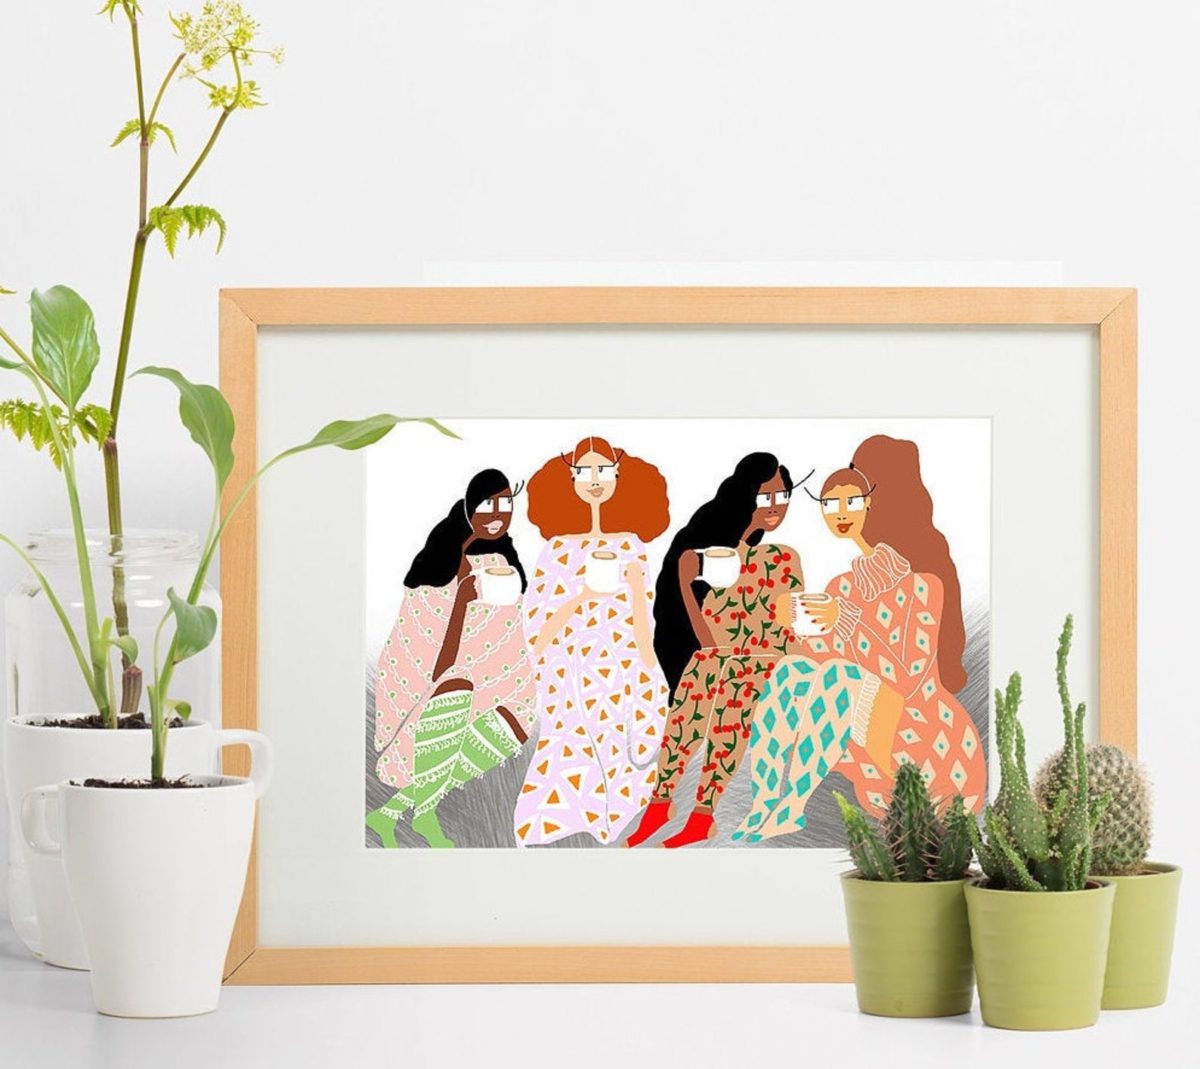 13 pieces of wall art from etsy you're sure to love